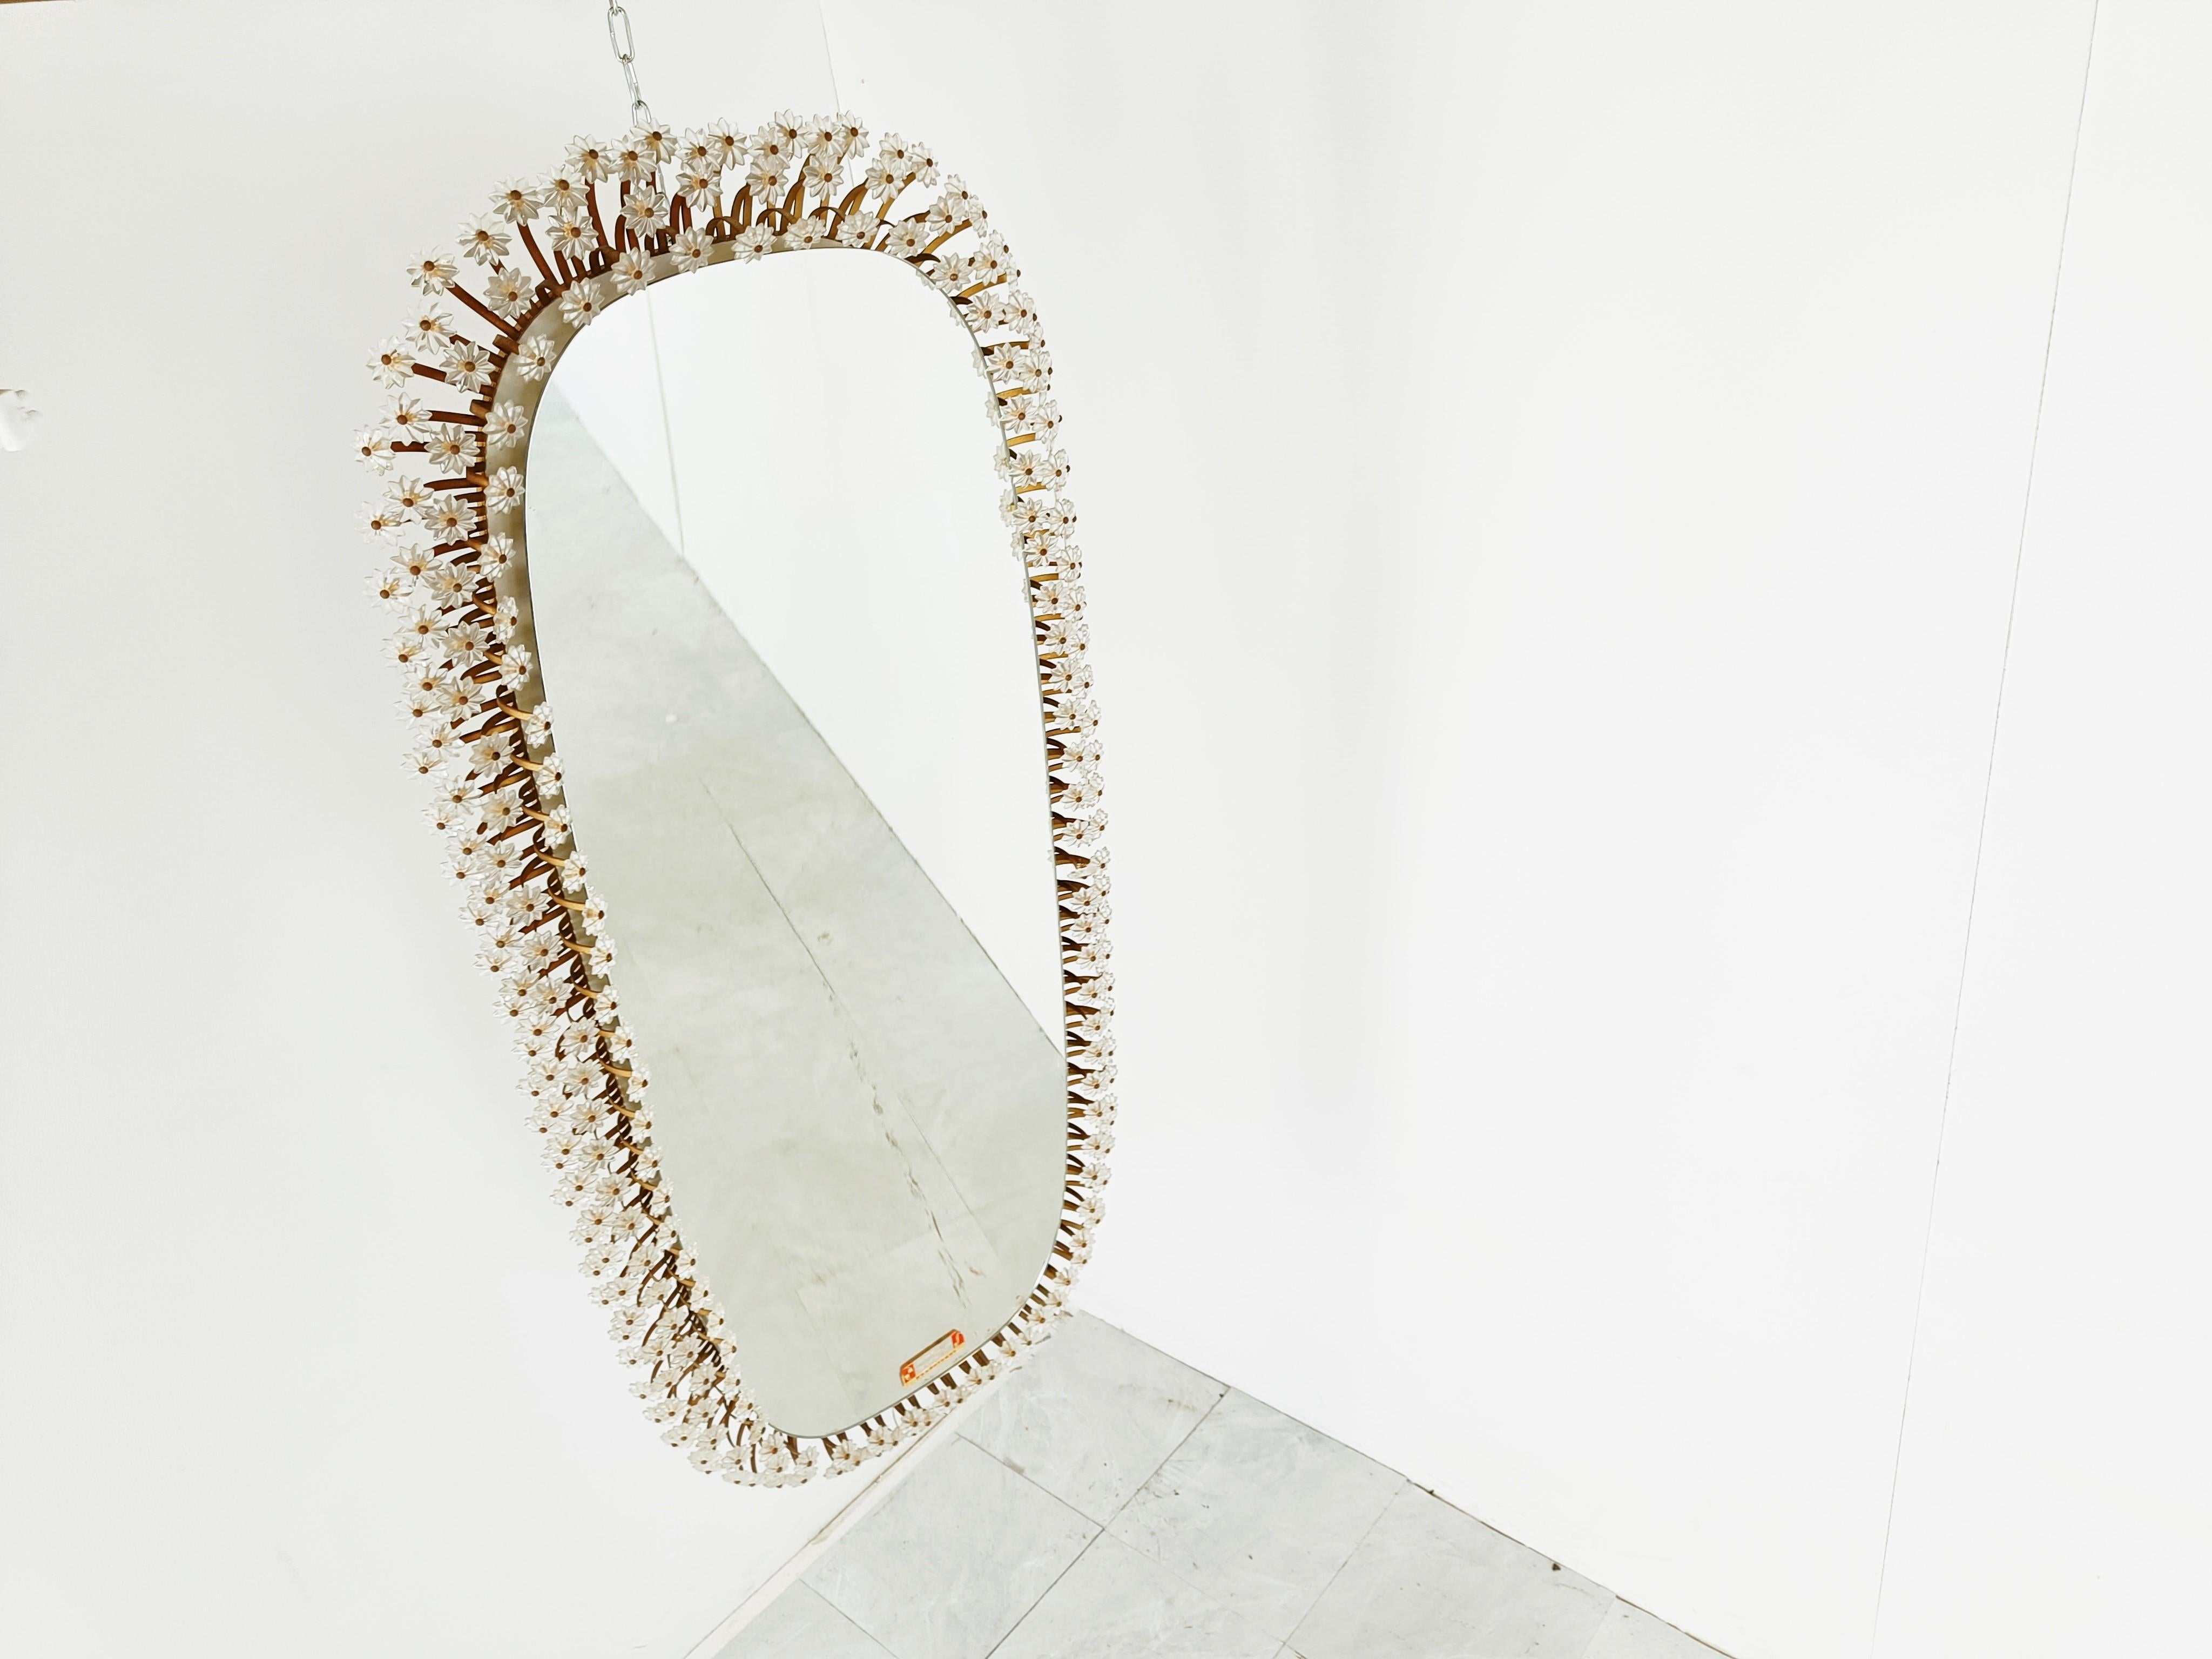 Mid century wall mirror by Emil Stejnar for Rupert Nikoll.

The mirror consists of an illuminated back with a large number of glass crystal glass flowers.

1950s - Austria

Very good condition

Tested and ready to use.

Dimensions:
Height: